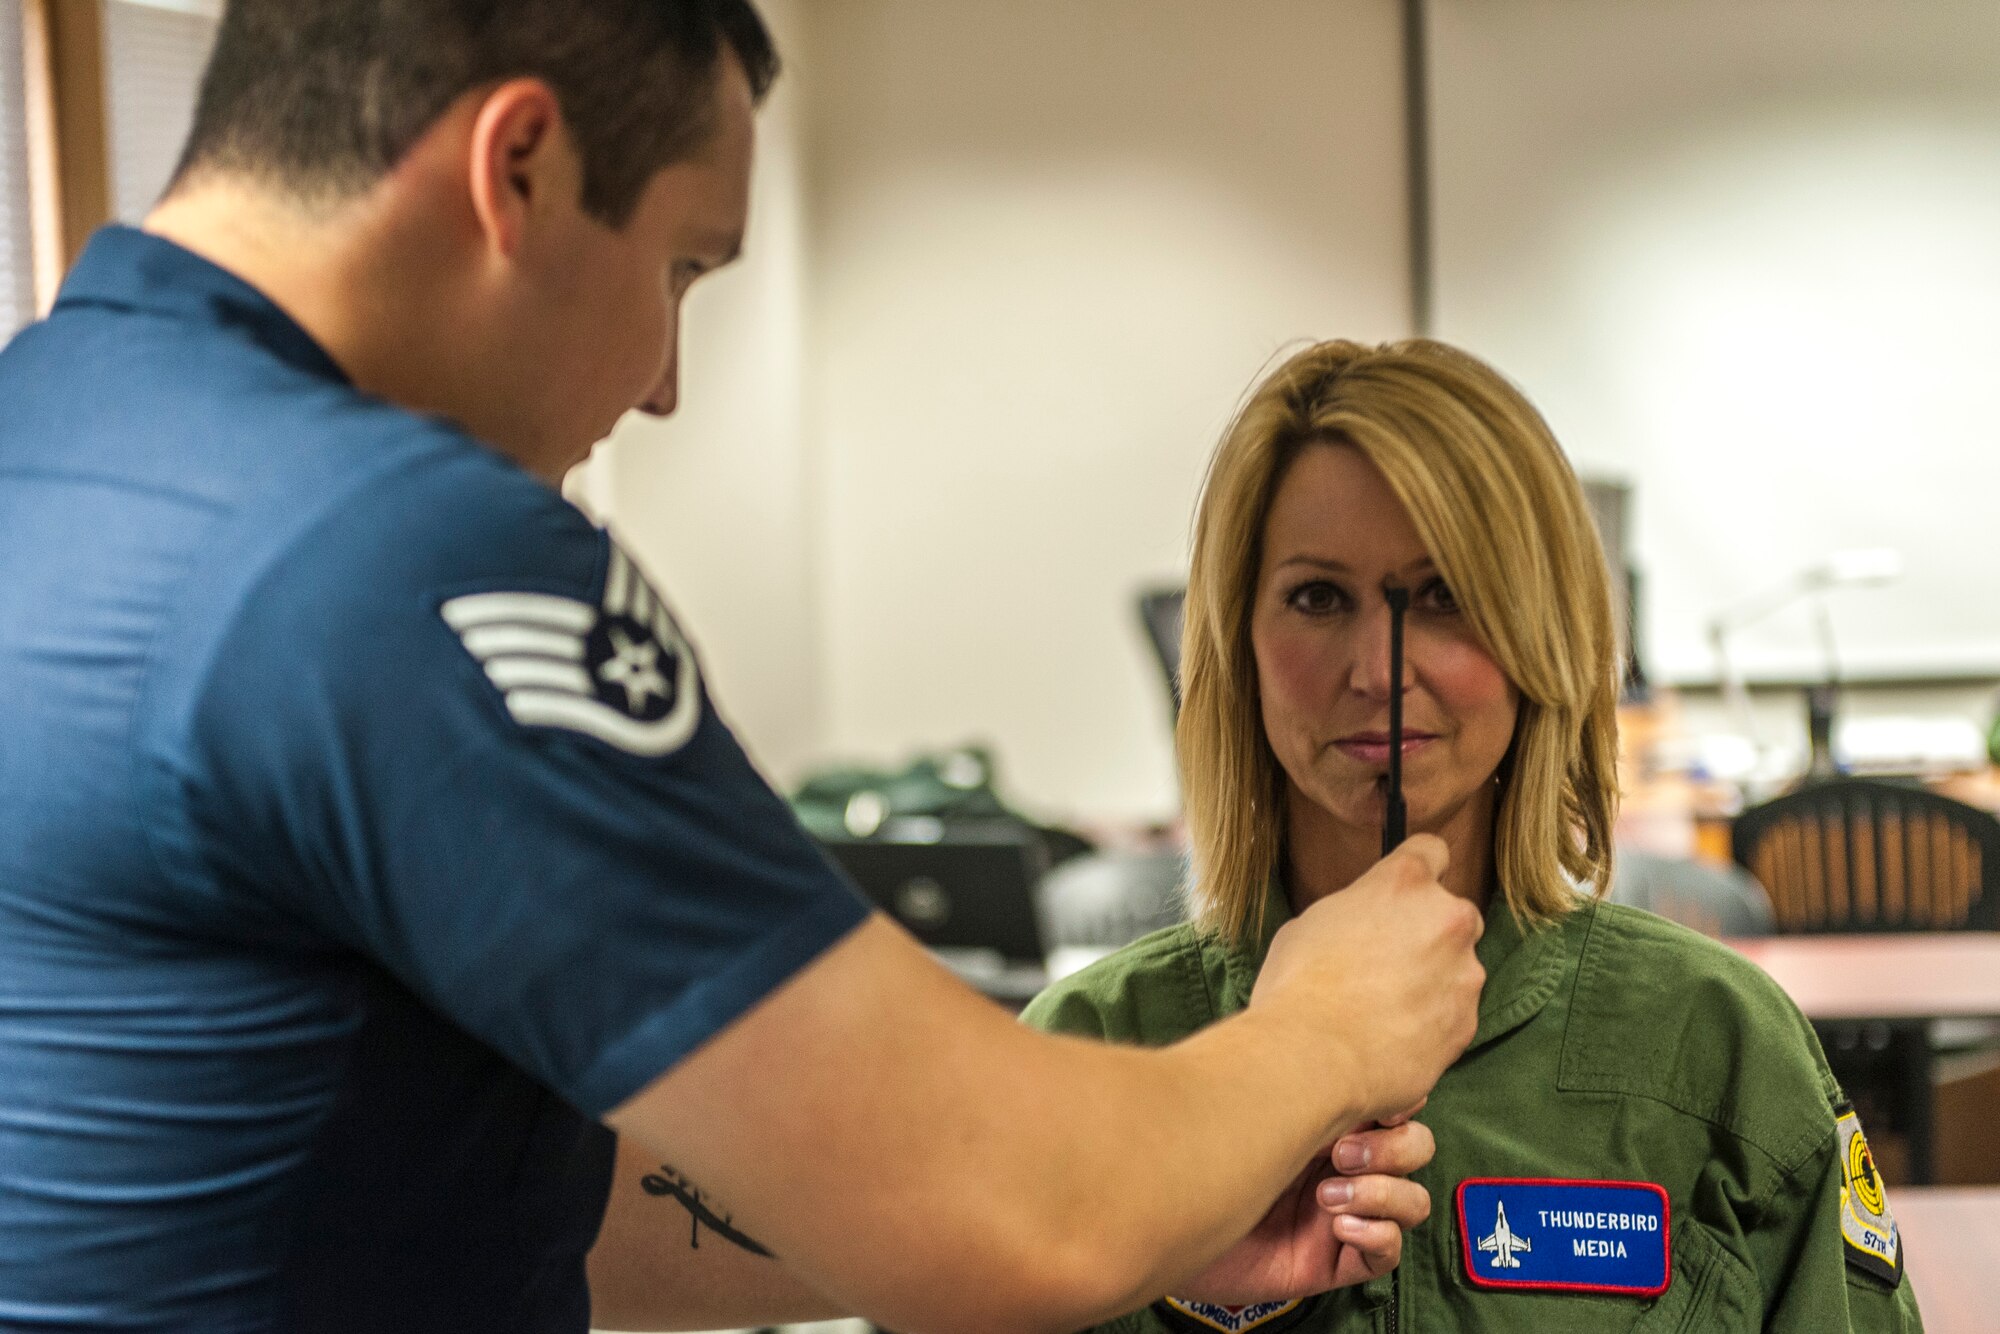 Staff Sgt. Jose Ibarra sizes Leslie Lowe for her helmet and mask in preparation for a U.S. Air Force Thunderbirds orientation flight as part of SkyFest 2014 at Fairchild Air Force Base, Wash., May 29, 2014. The Thunderbirds is an Air Combat Command unit composed of eight pilots, including six demonstration pilots, four support officers, three civilians and more than 130 enlisted personnel performing in 25 career fields. SkyFest is Fairchild’s air show and open house, giving the local and regional community the opportunity to view Airmen and our resources. Ibarra is a Thunderbirds aircrew flight equipment specialist here from Nellis AFB, Nev., and Lowe is a KHQ 6 reporter. (U.S. Air Force photo by Staff Sgt. Benjamin W. Stratton/Released)